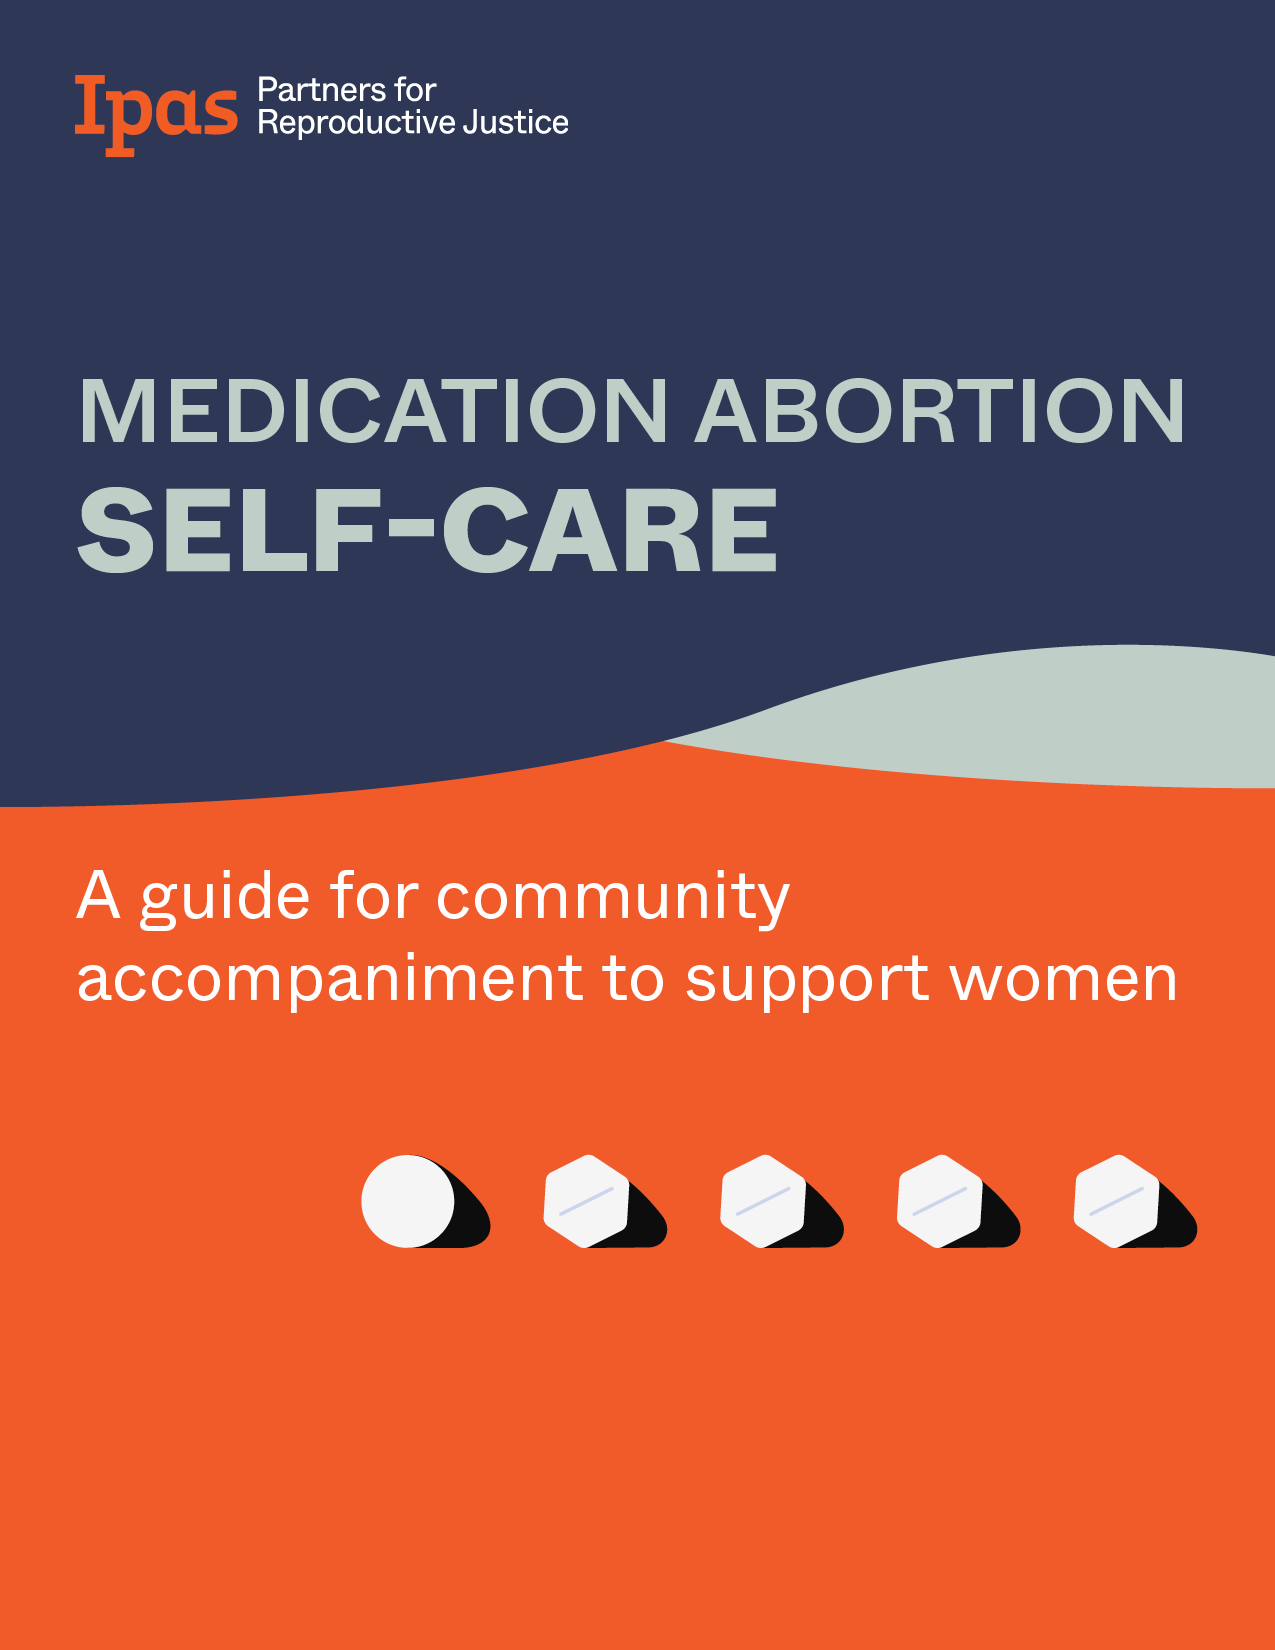 Medication abortion self-care: A guide for community accompaniment to support women resource image